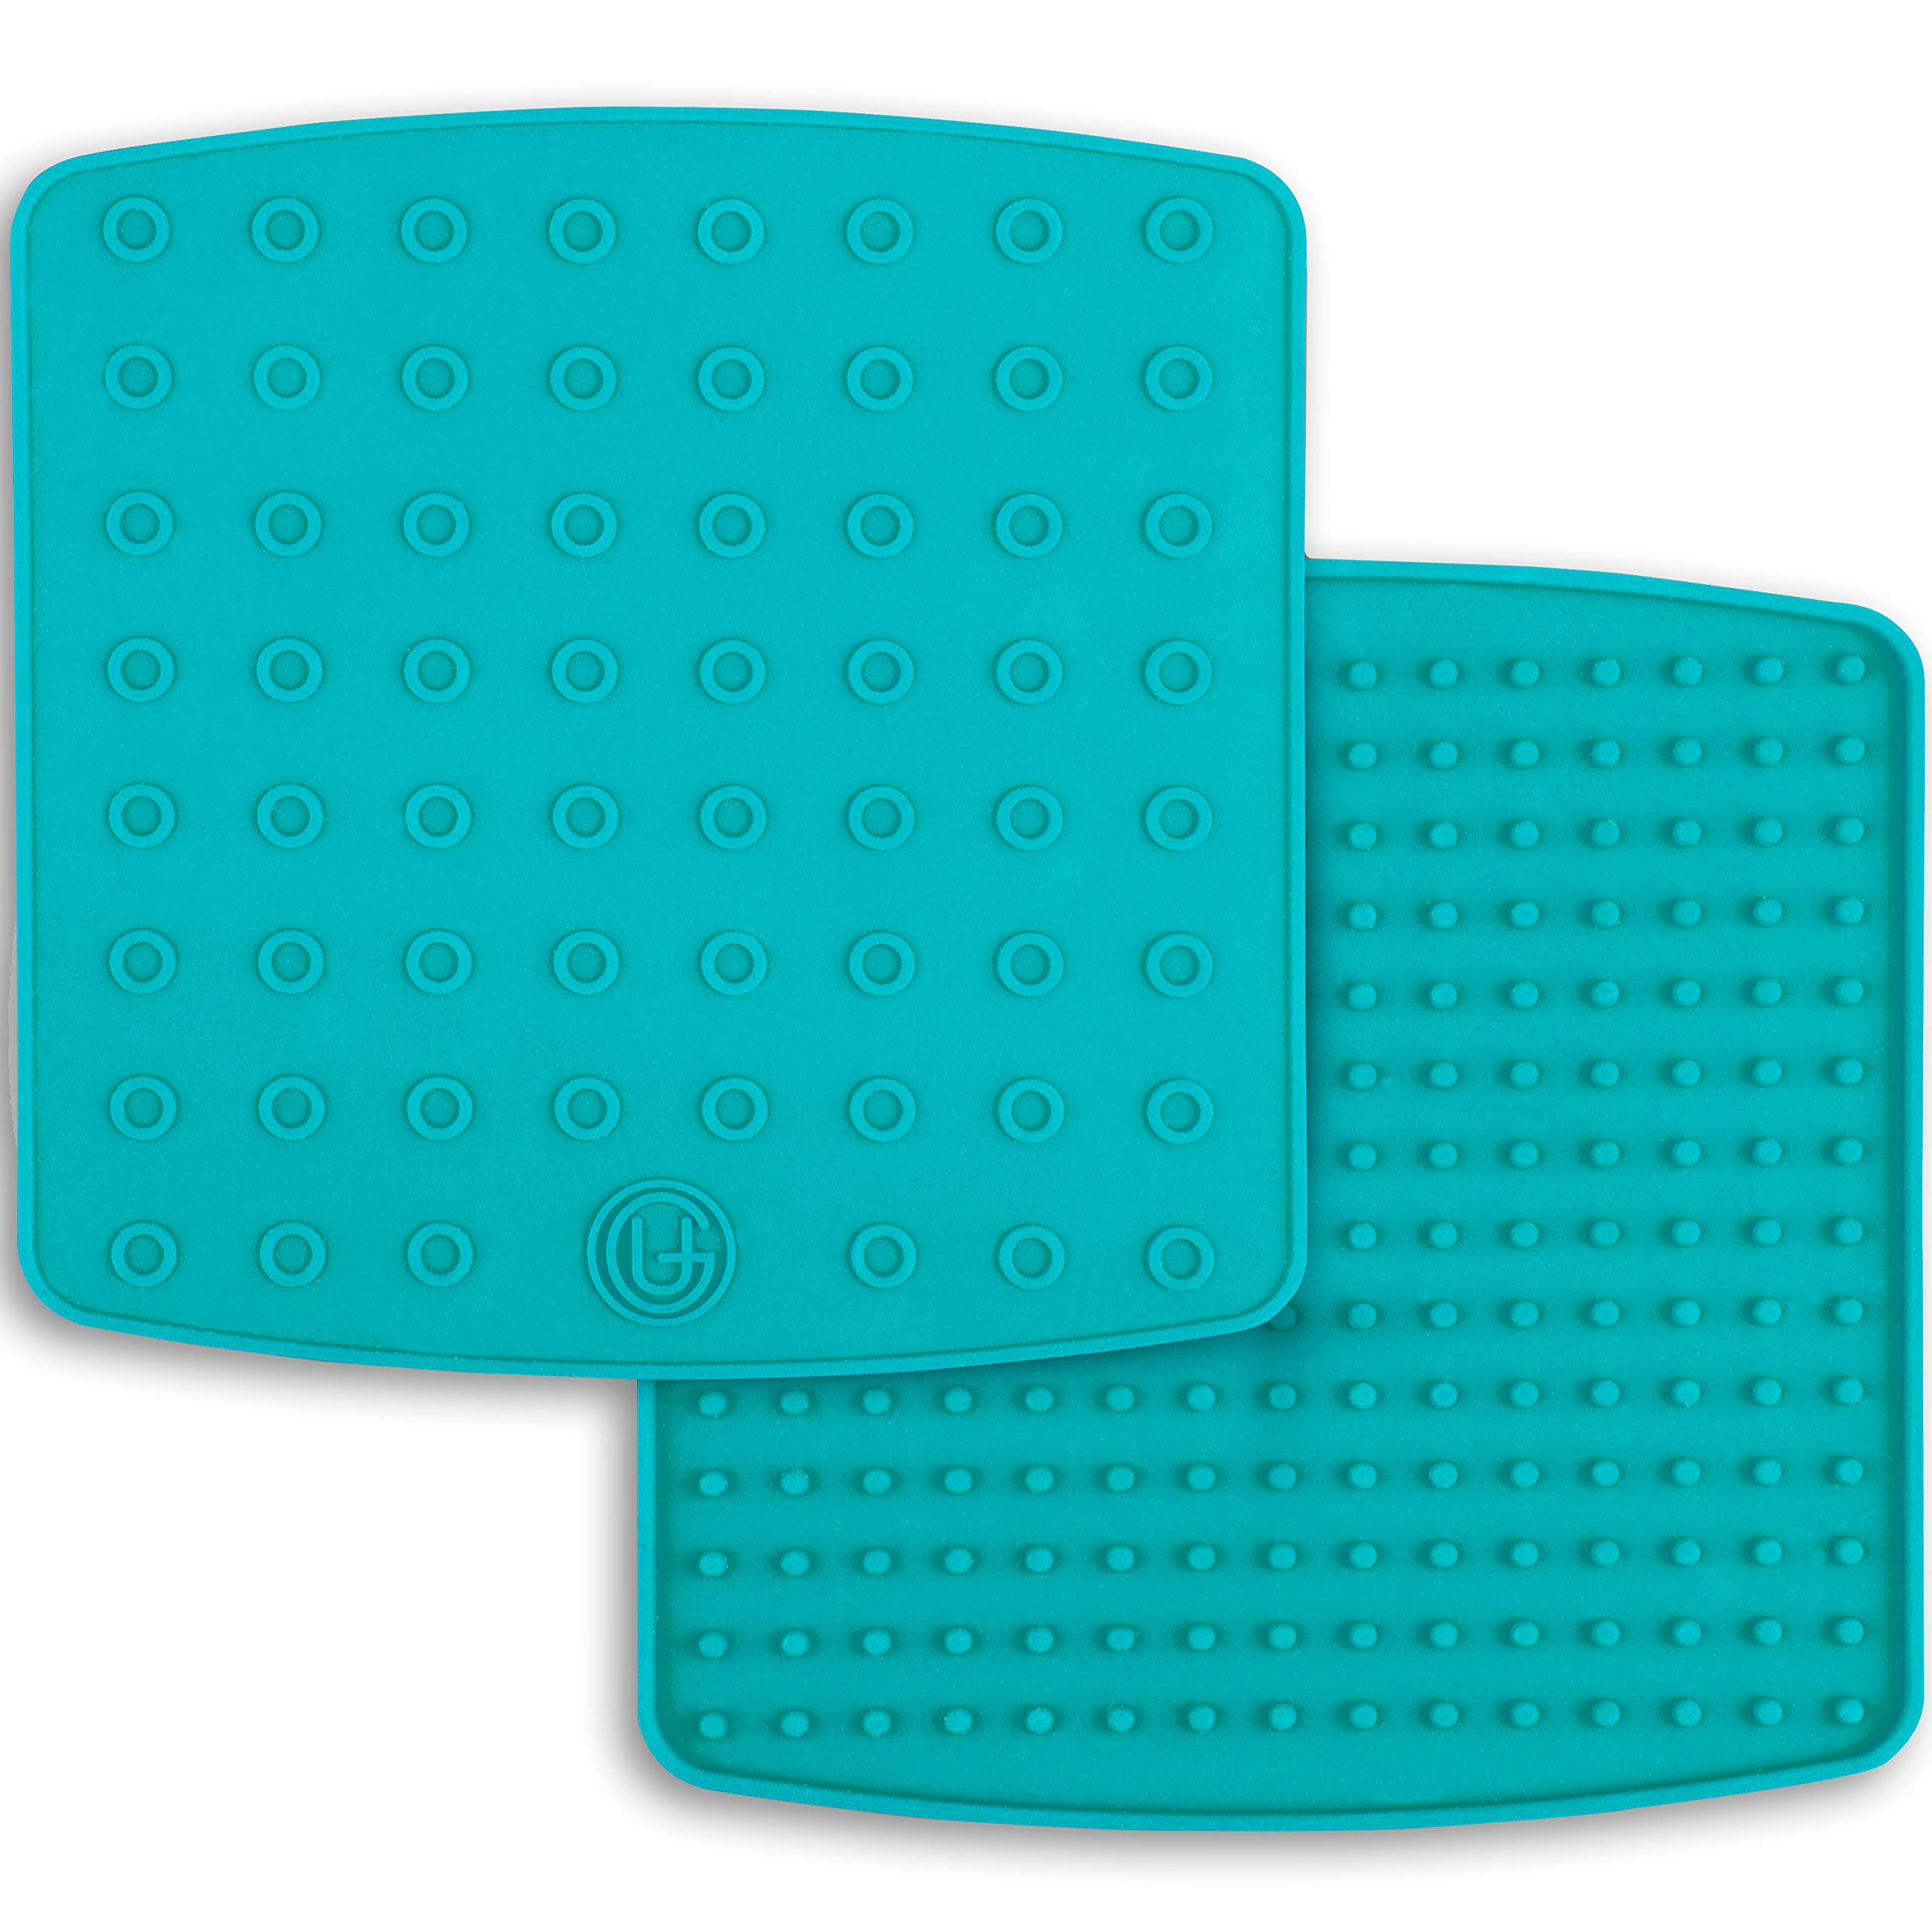 Premium Silicone Pot Holder for Pots/Pans | Multipurpose Trivets | Hot Pad, Spoon Rest, Coaster and More | 2 Pads | Featuring Heat Resistant Core Tech | UpGood Pro Series (Cool Kitchen Tools, Teal)